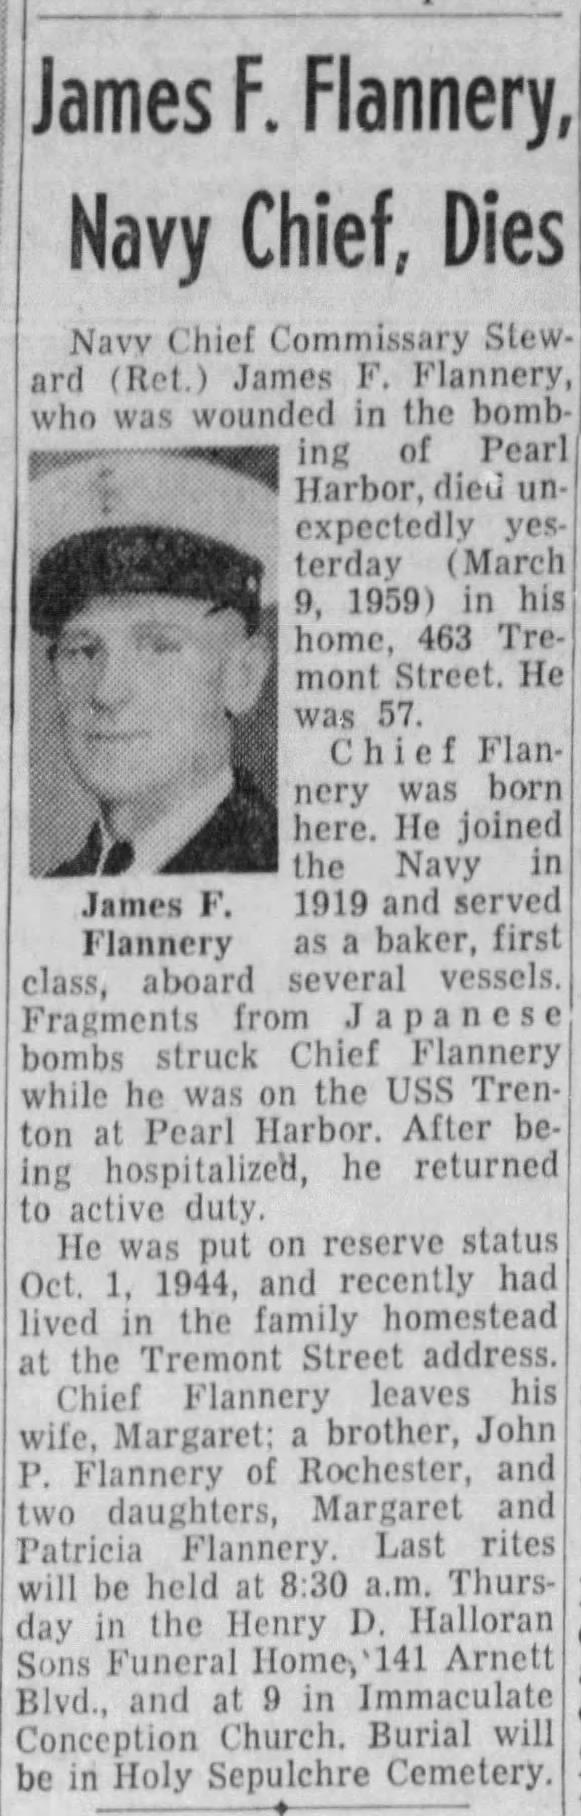 James Flannery, Navy, Chief Dies